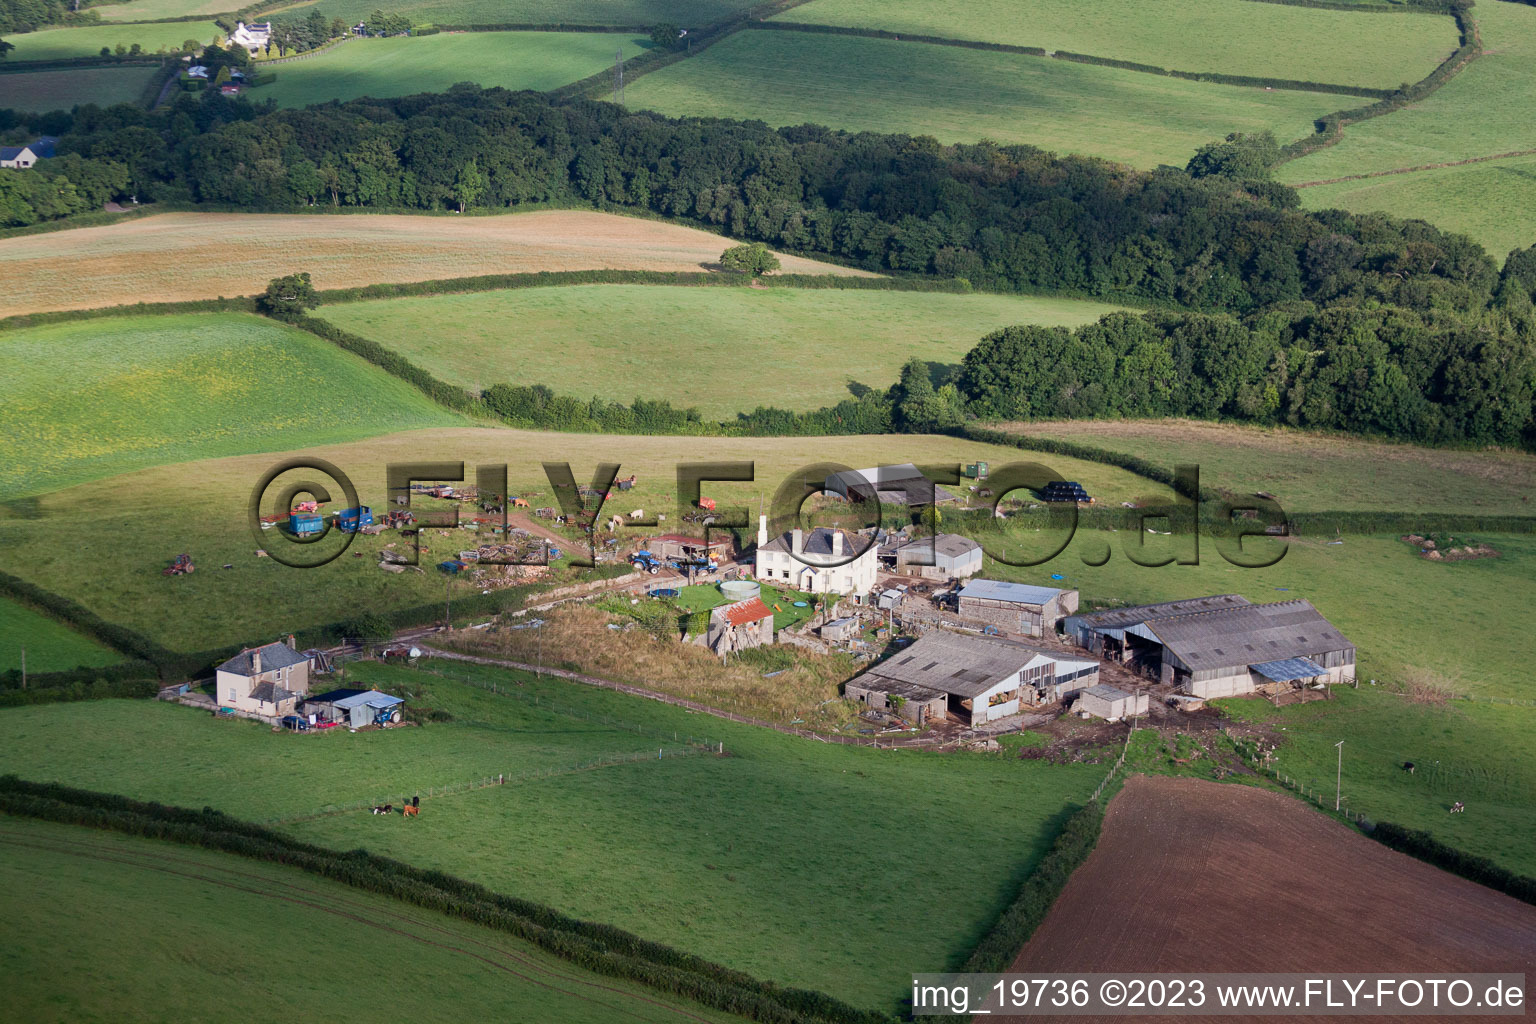 Aerial photograpy of Denbury in the state England, Great Britain